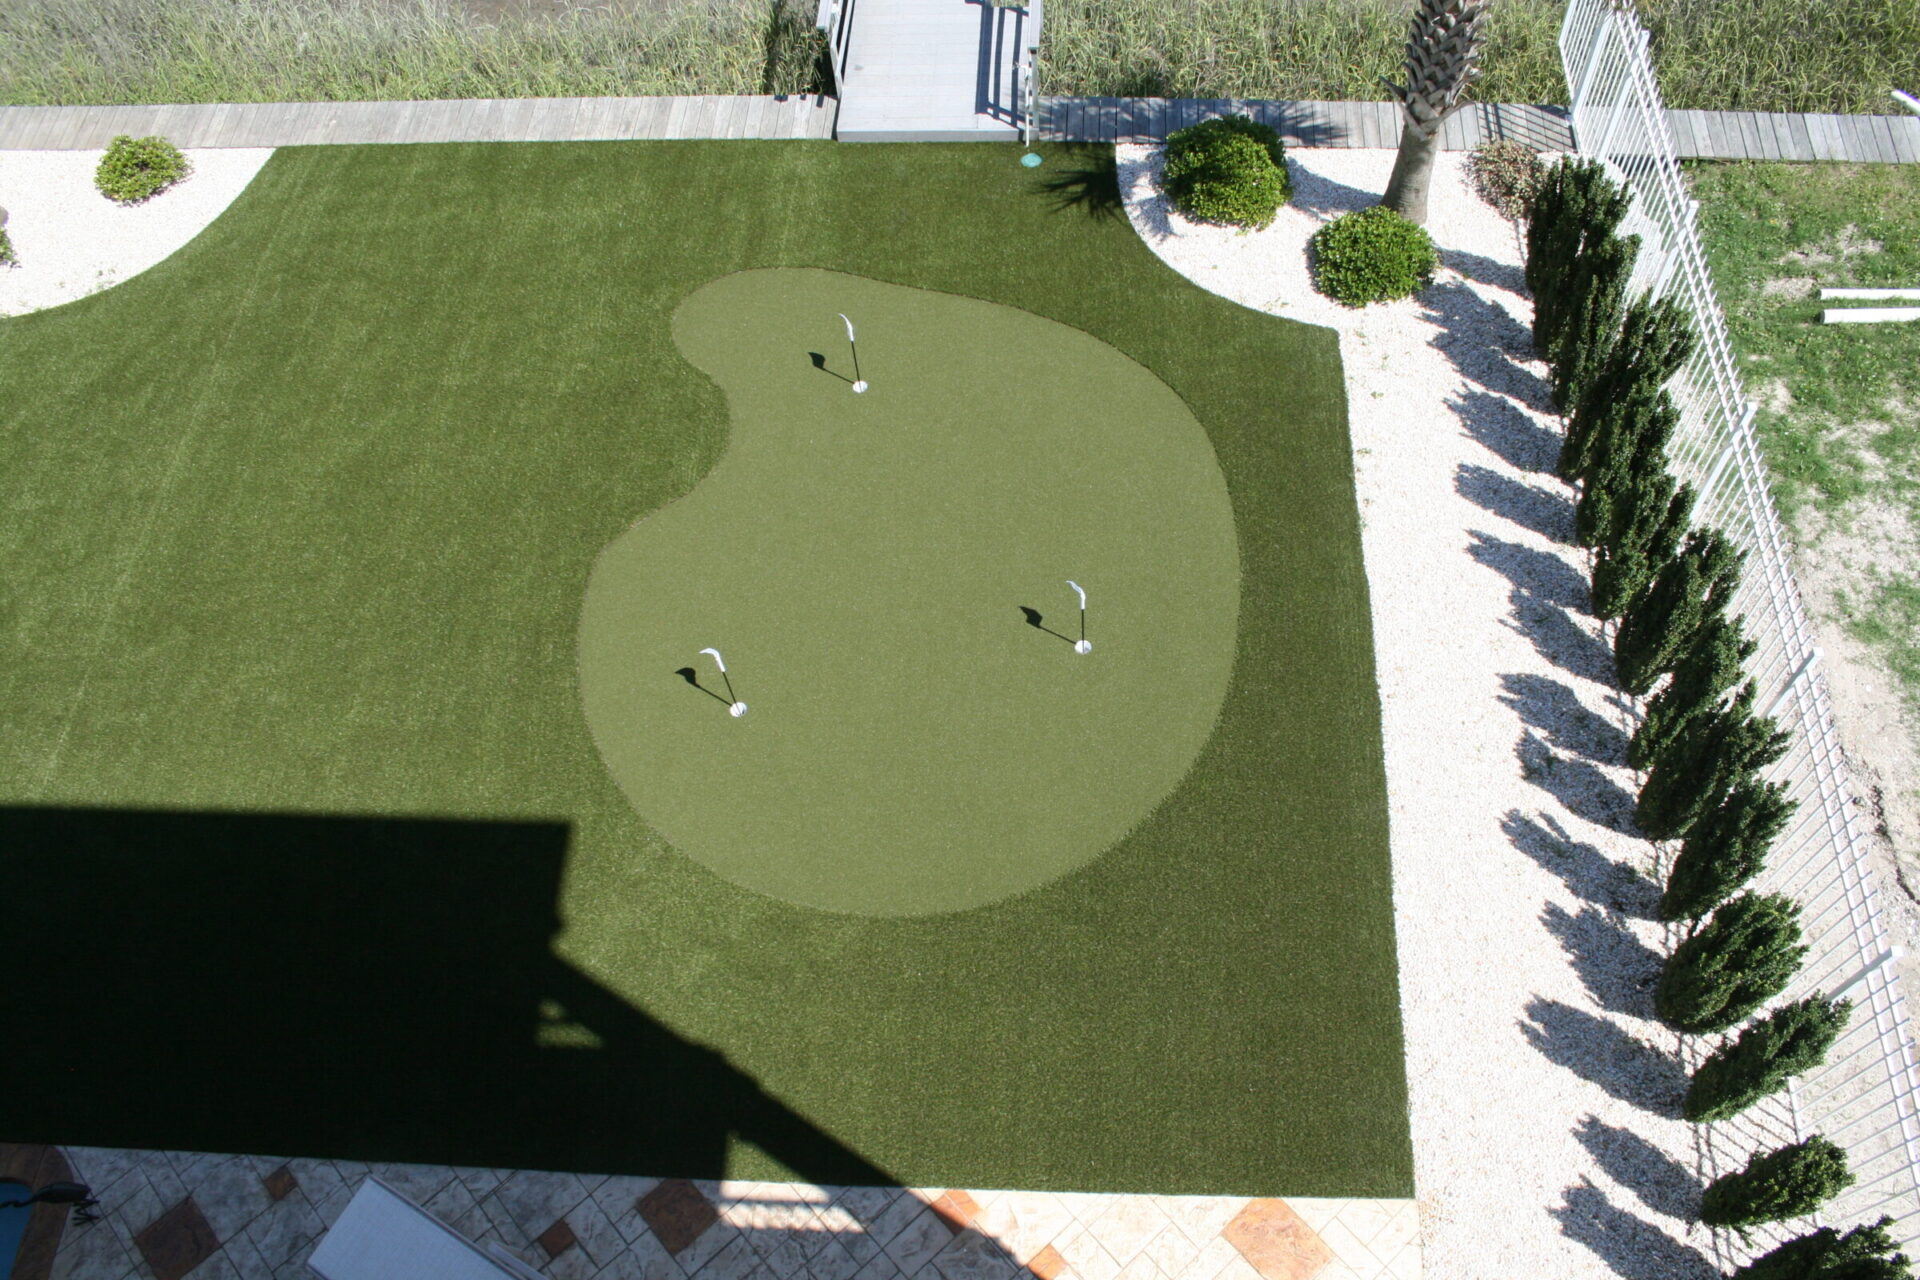 This aerial image shows a backyard putting green with two golf holes, surrounded by neat landscaping, under the clear shadow of a building.